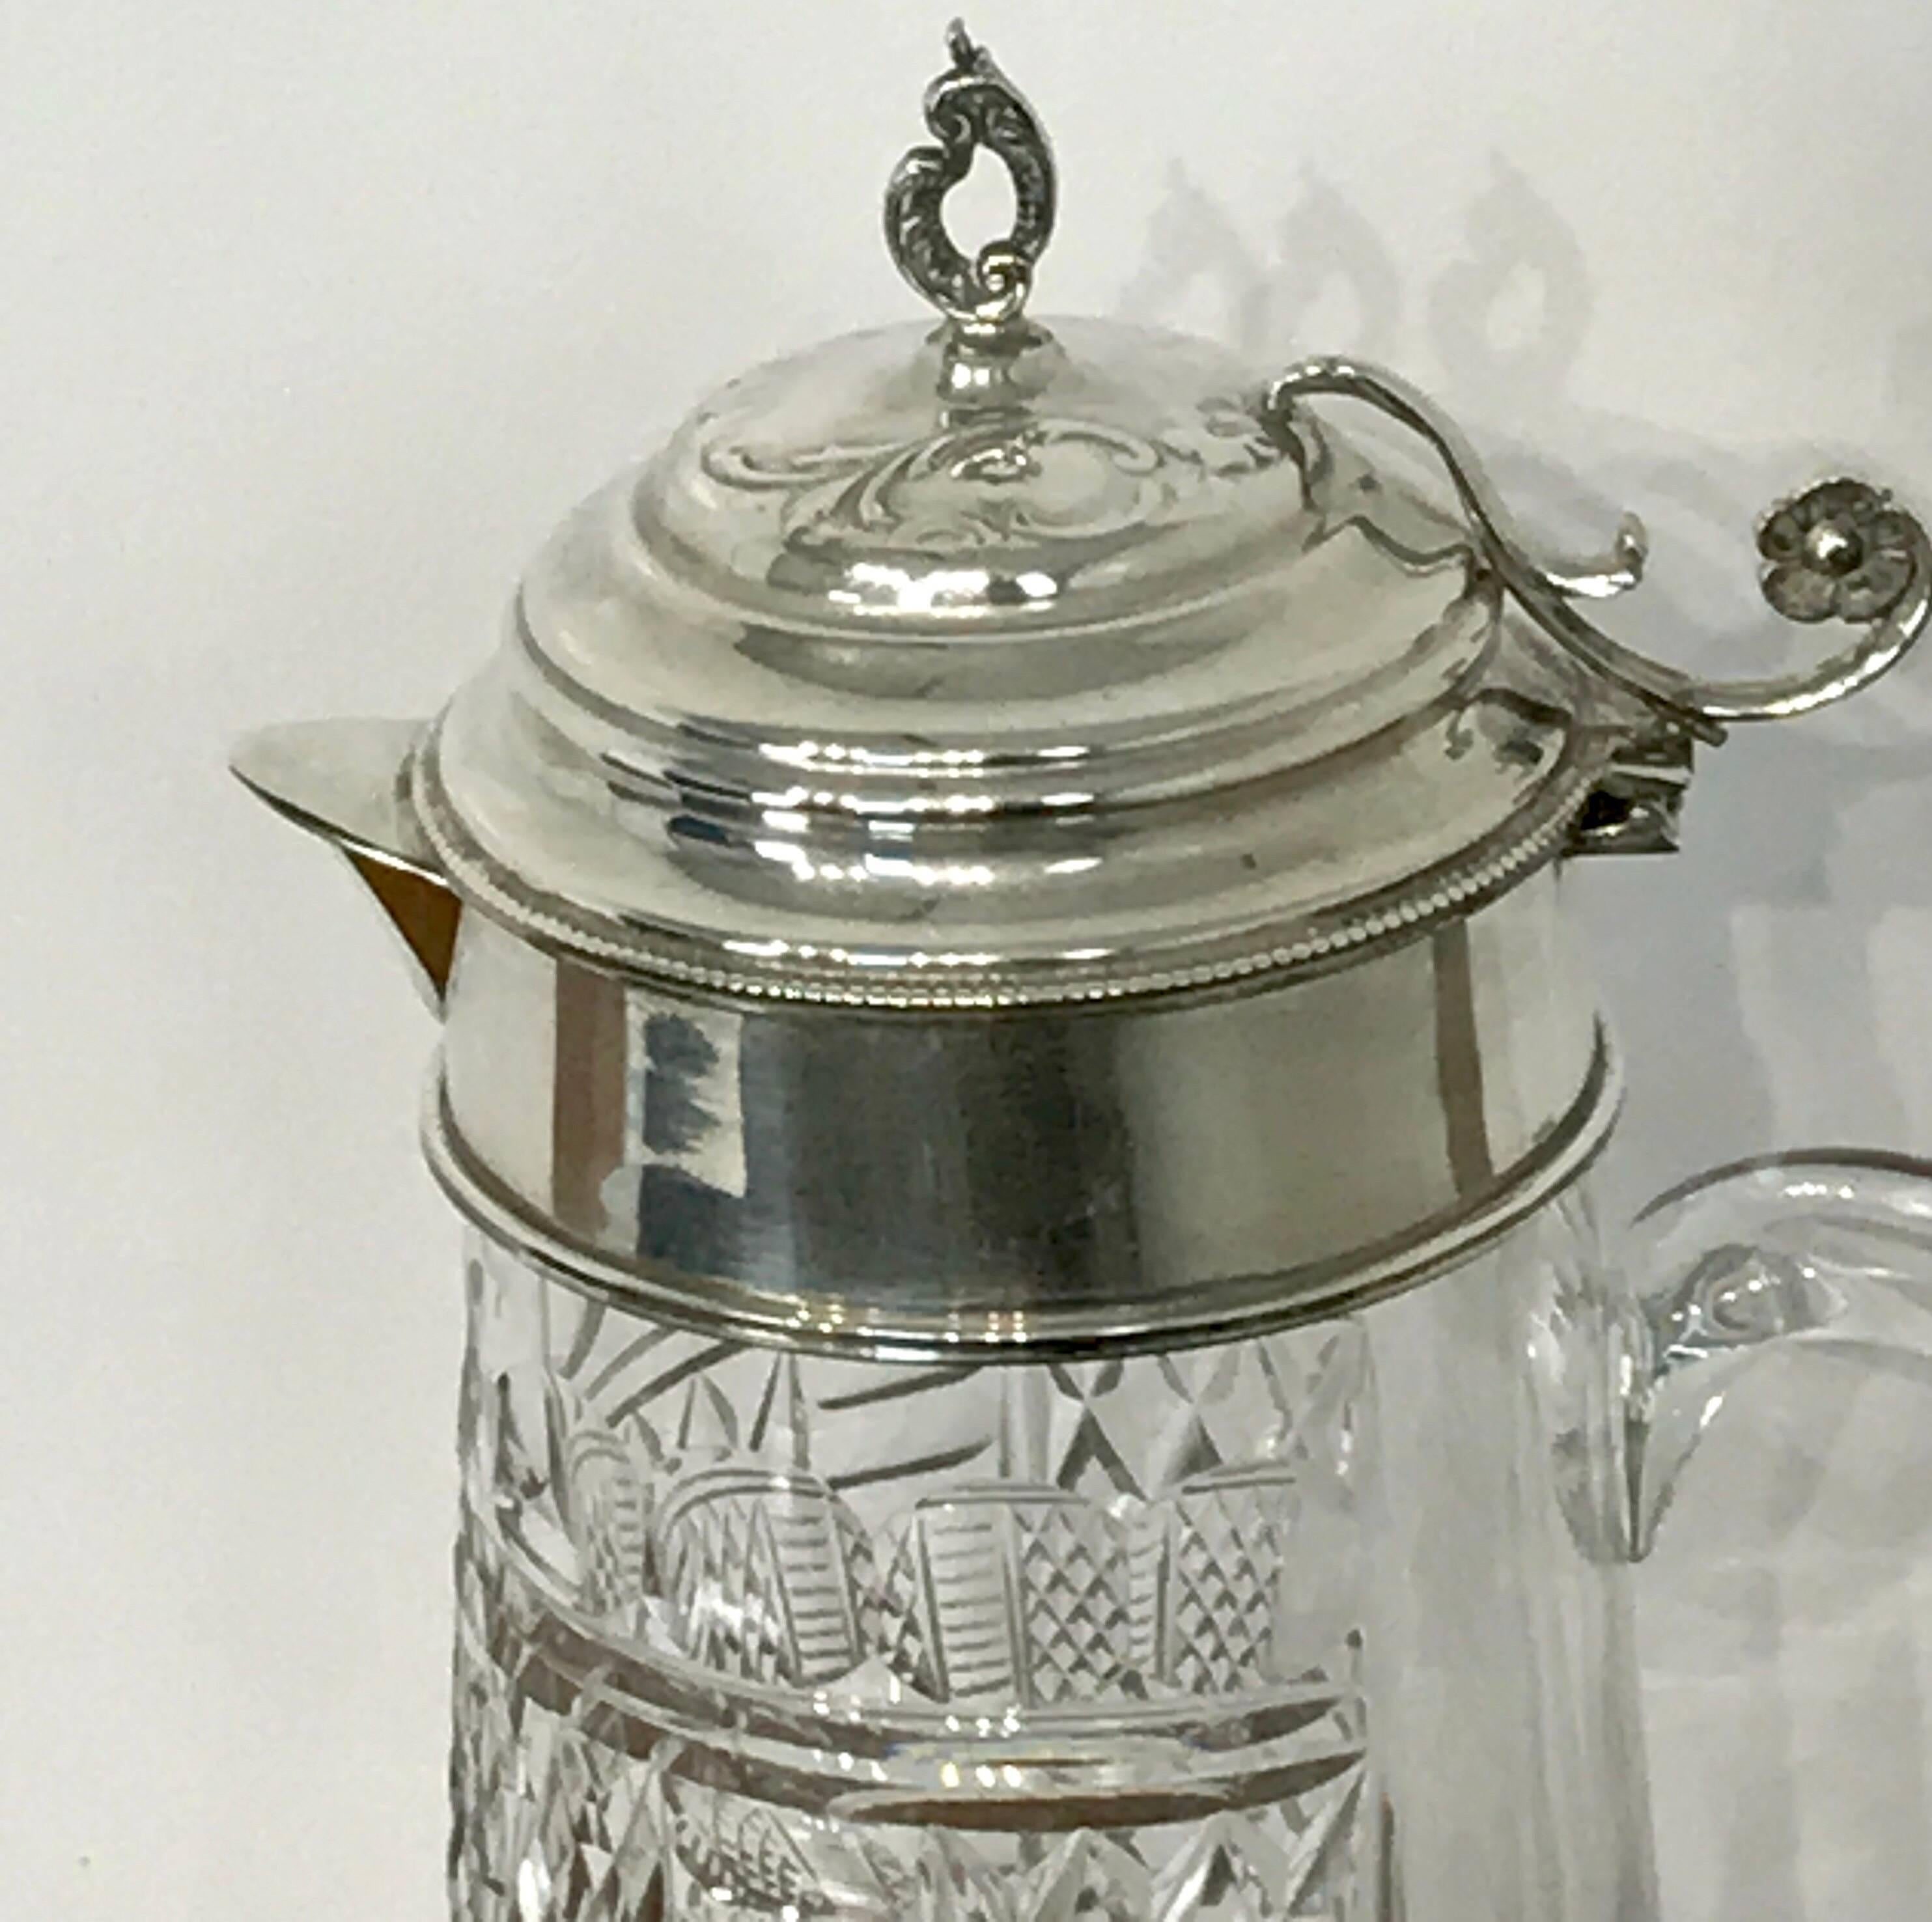 Large sterling mounted cut-glass claret jug, with hinged top, on a cylinder cut-glass diamond pattern handled jug. Measures: Standing 12.5